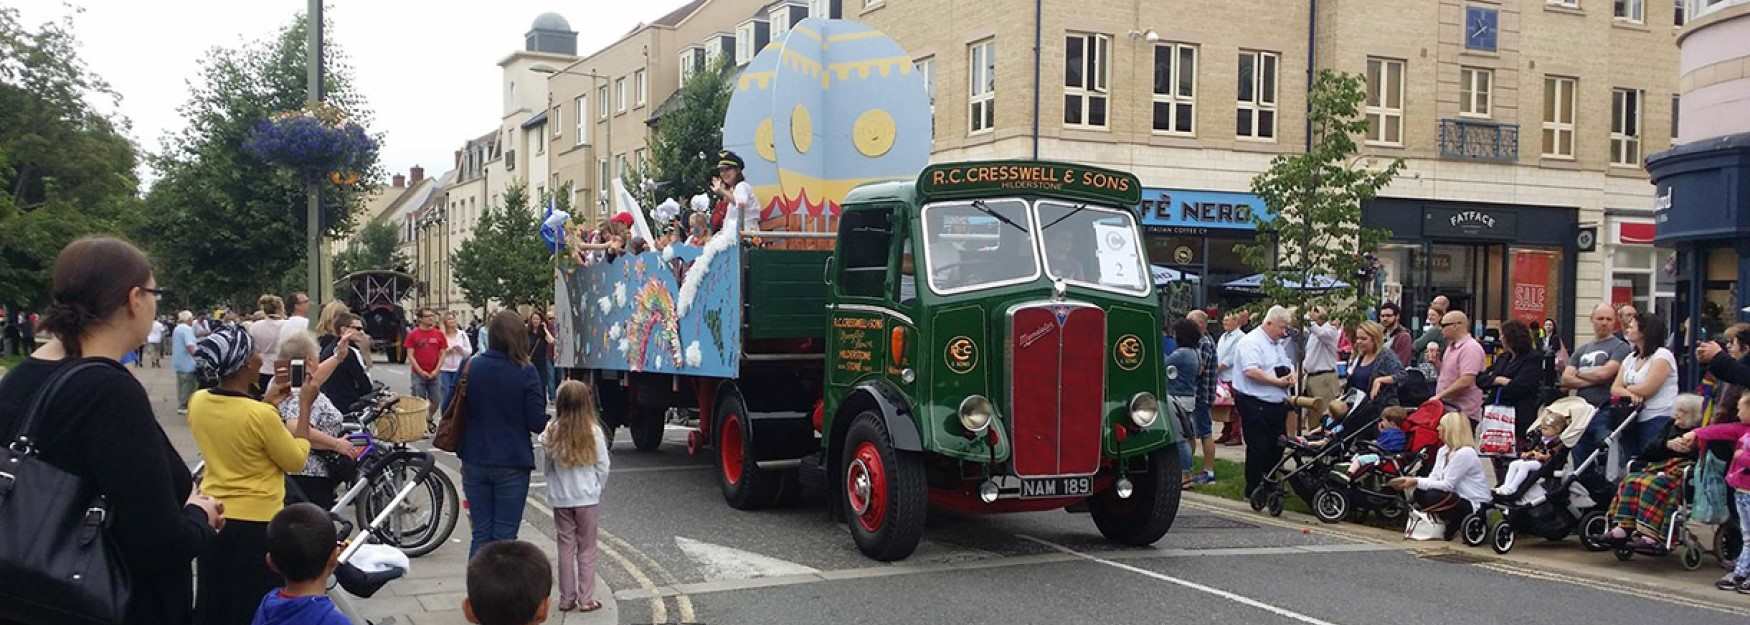 Parade at Witney Carnival